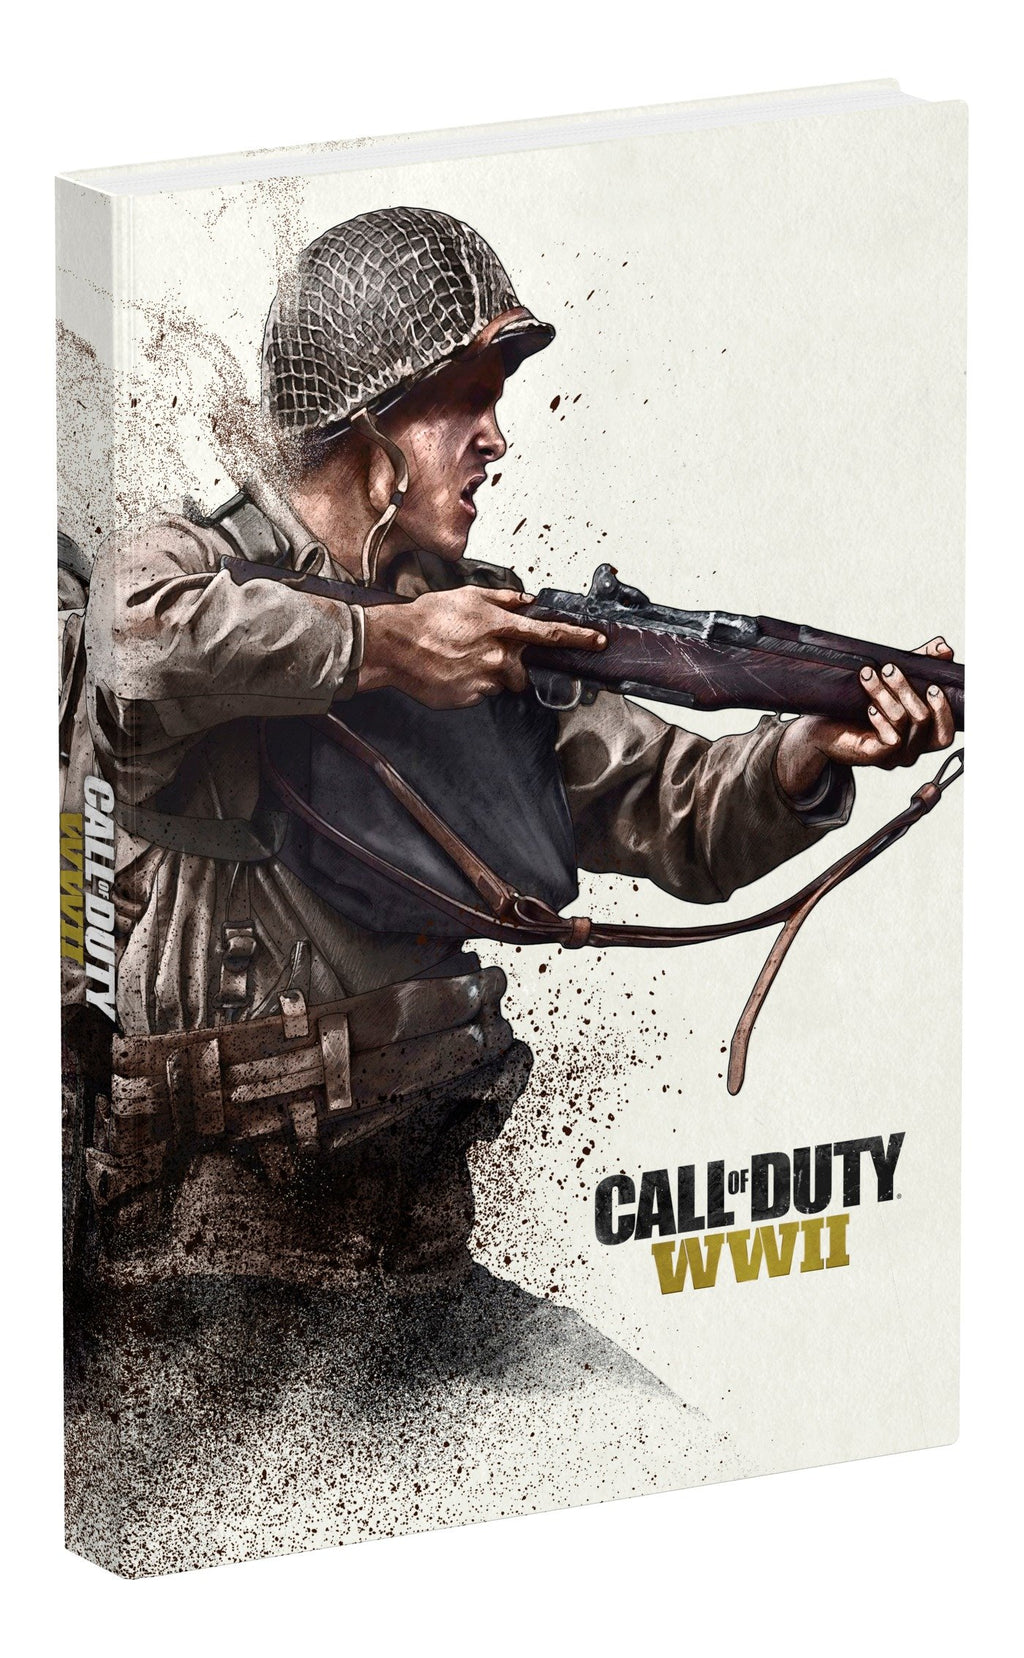 Call of Duty: WWII: Prima Collector's Edition Guide